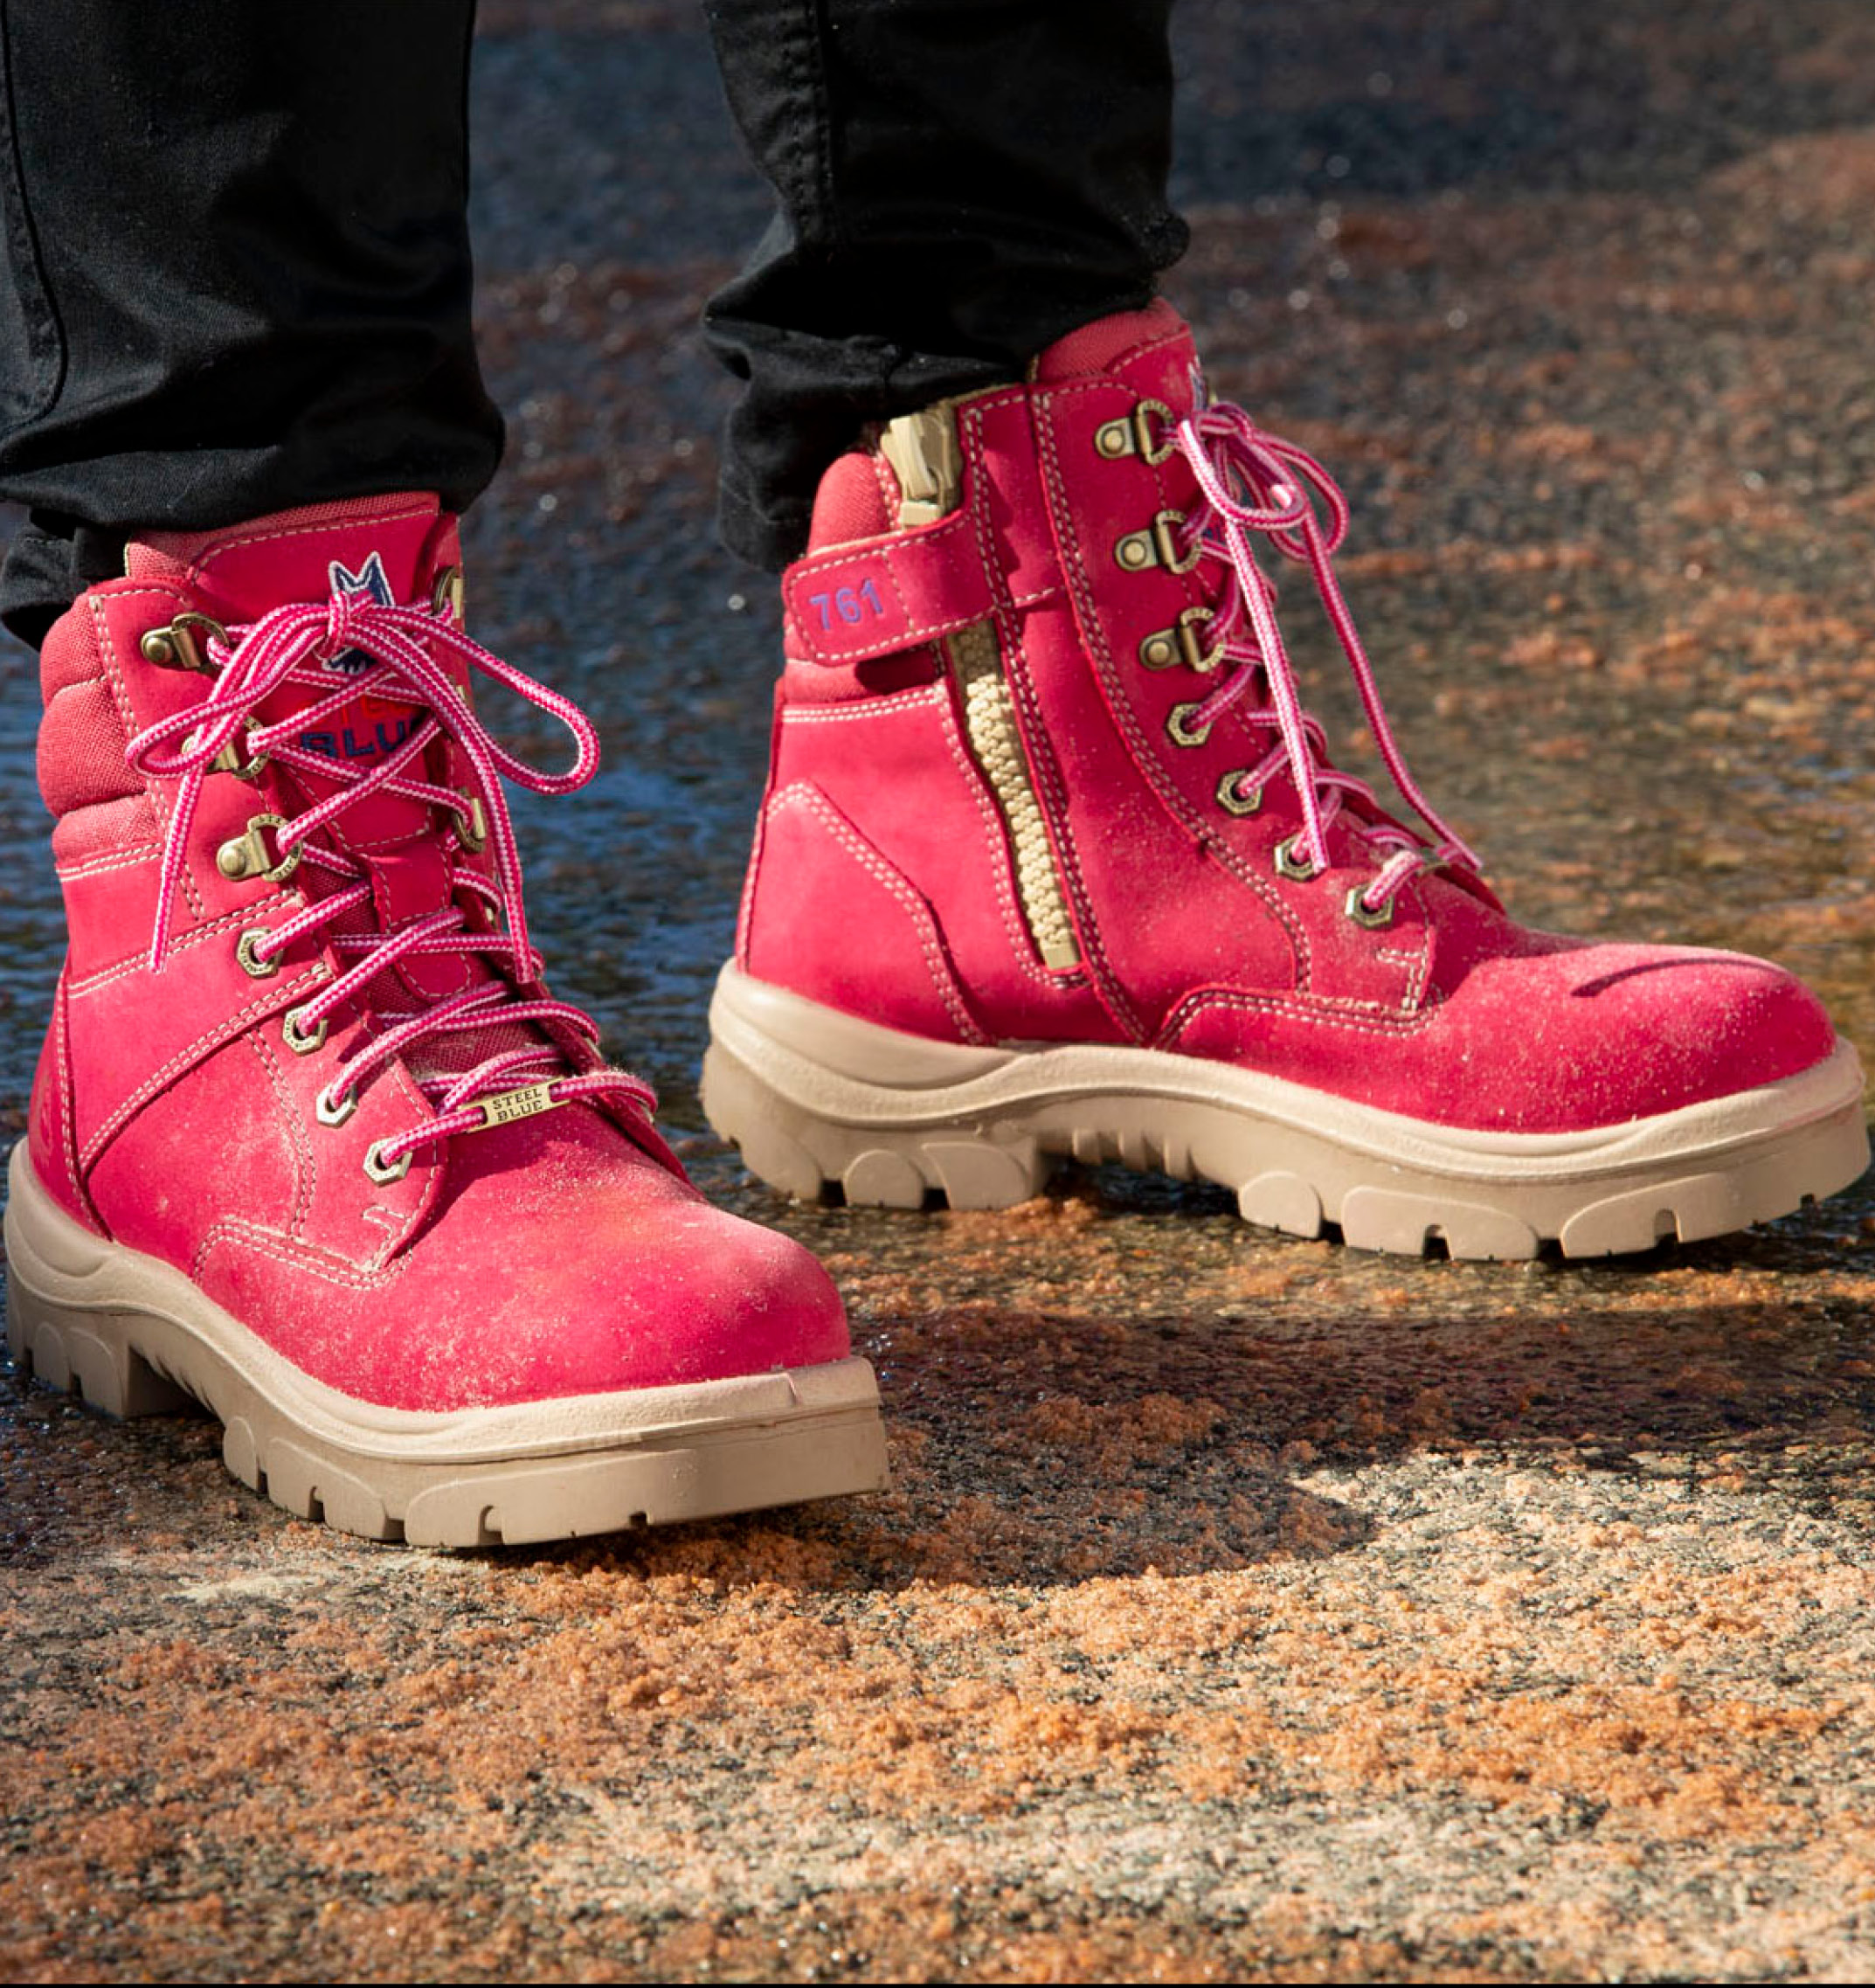 pink womens work boots